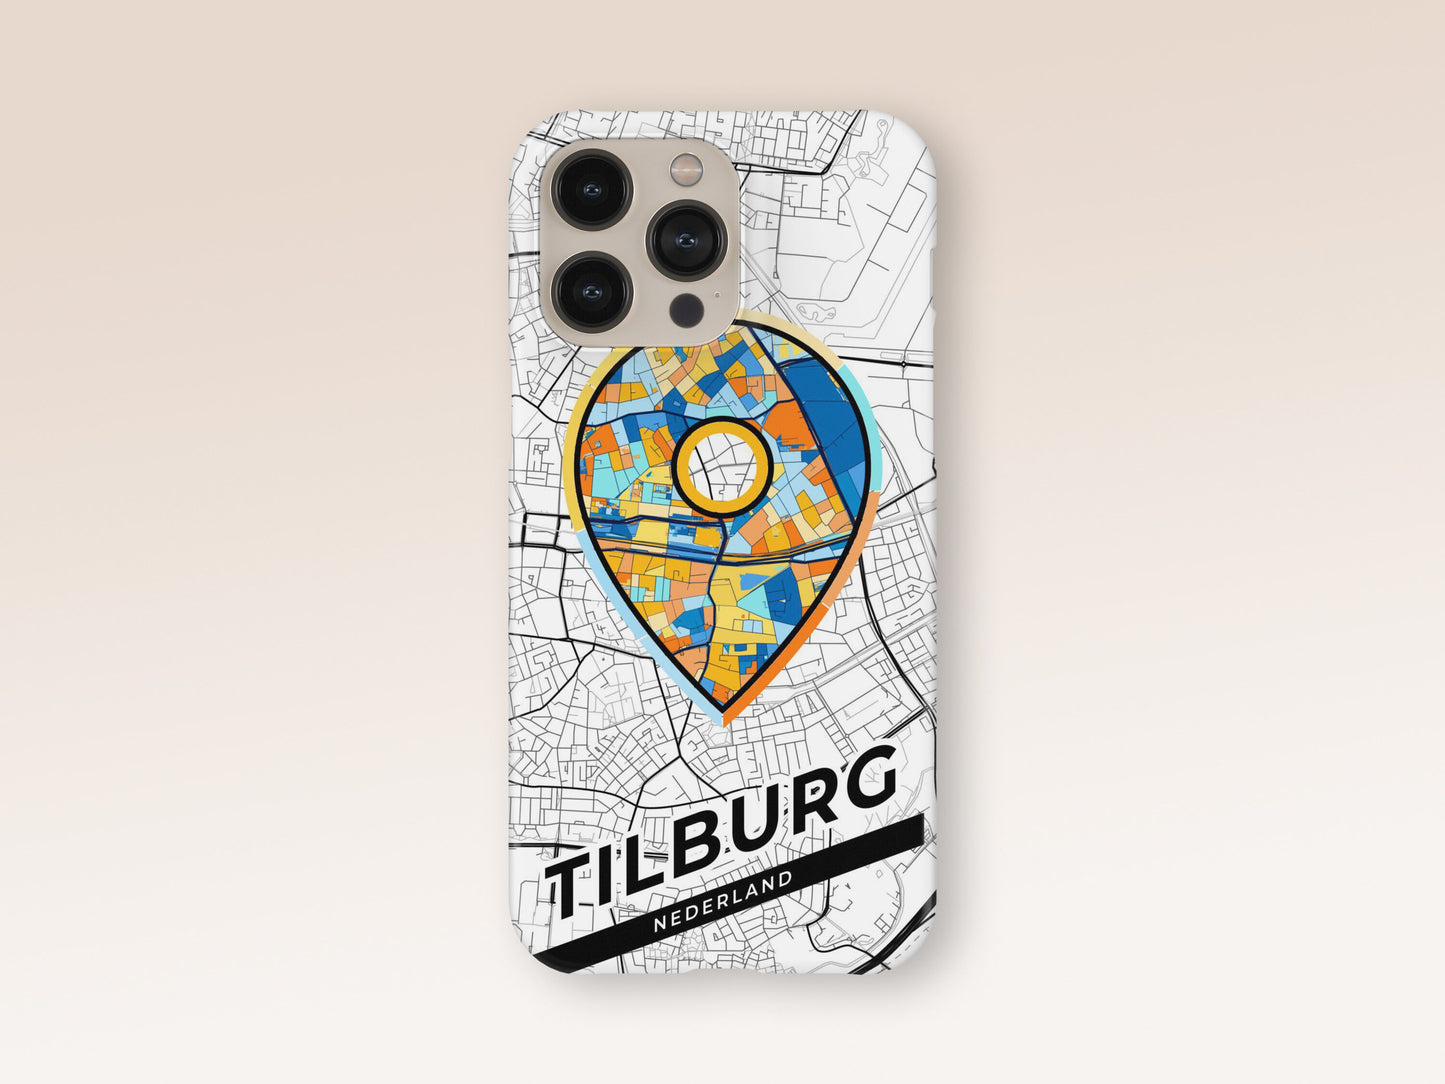 Tilburg Netherlands slim phone case with colorful icon 1